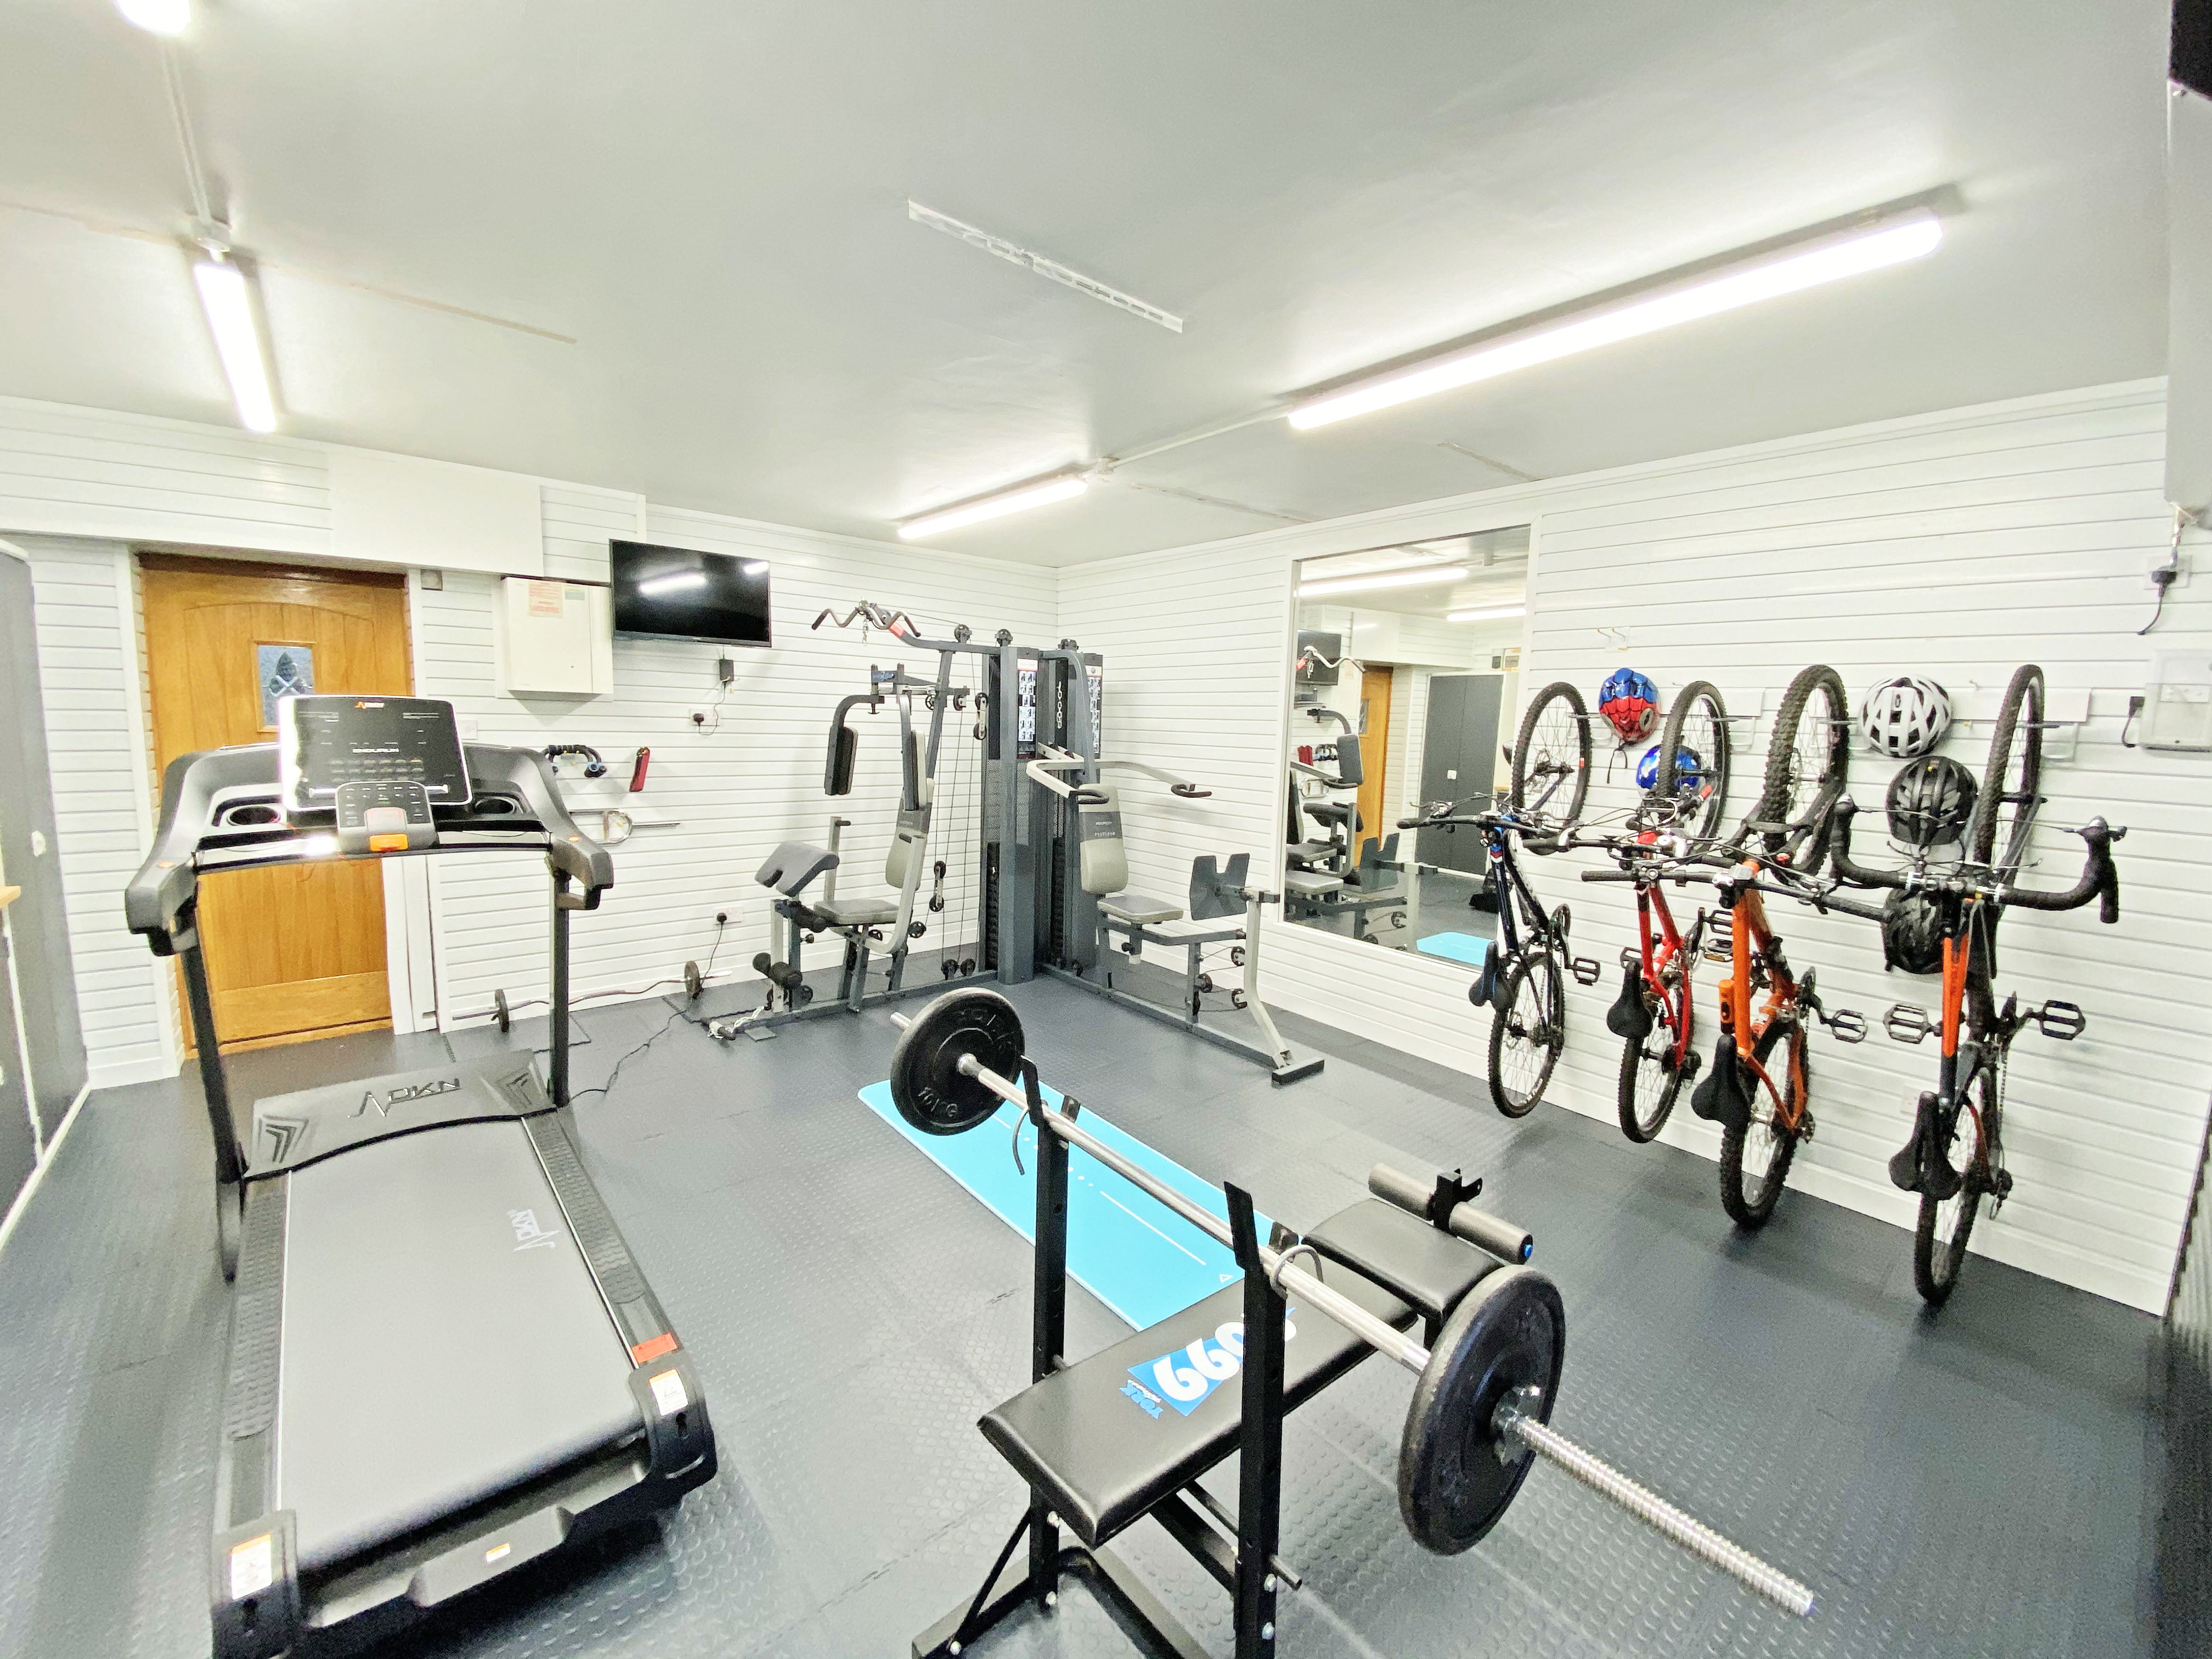 Garage Gym Ideas for the Perfect Home Workout Space